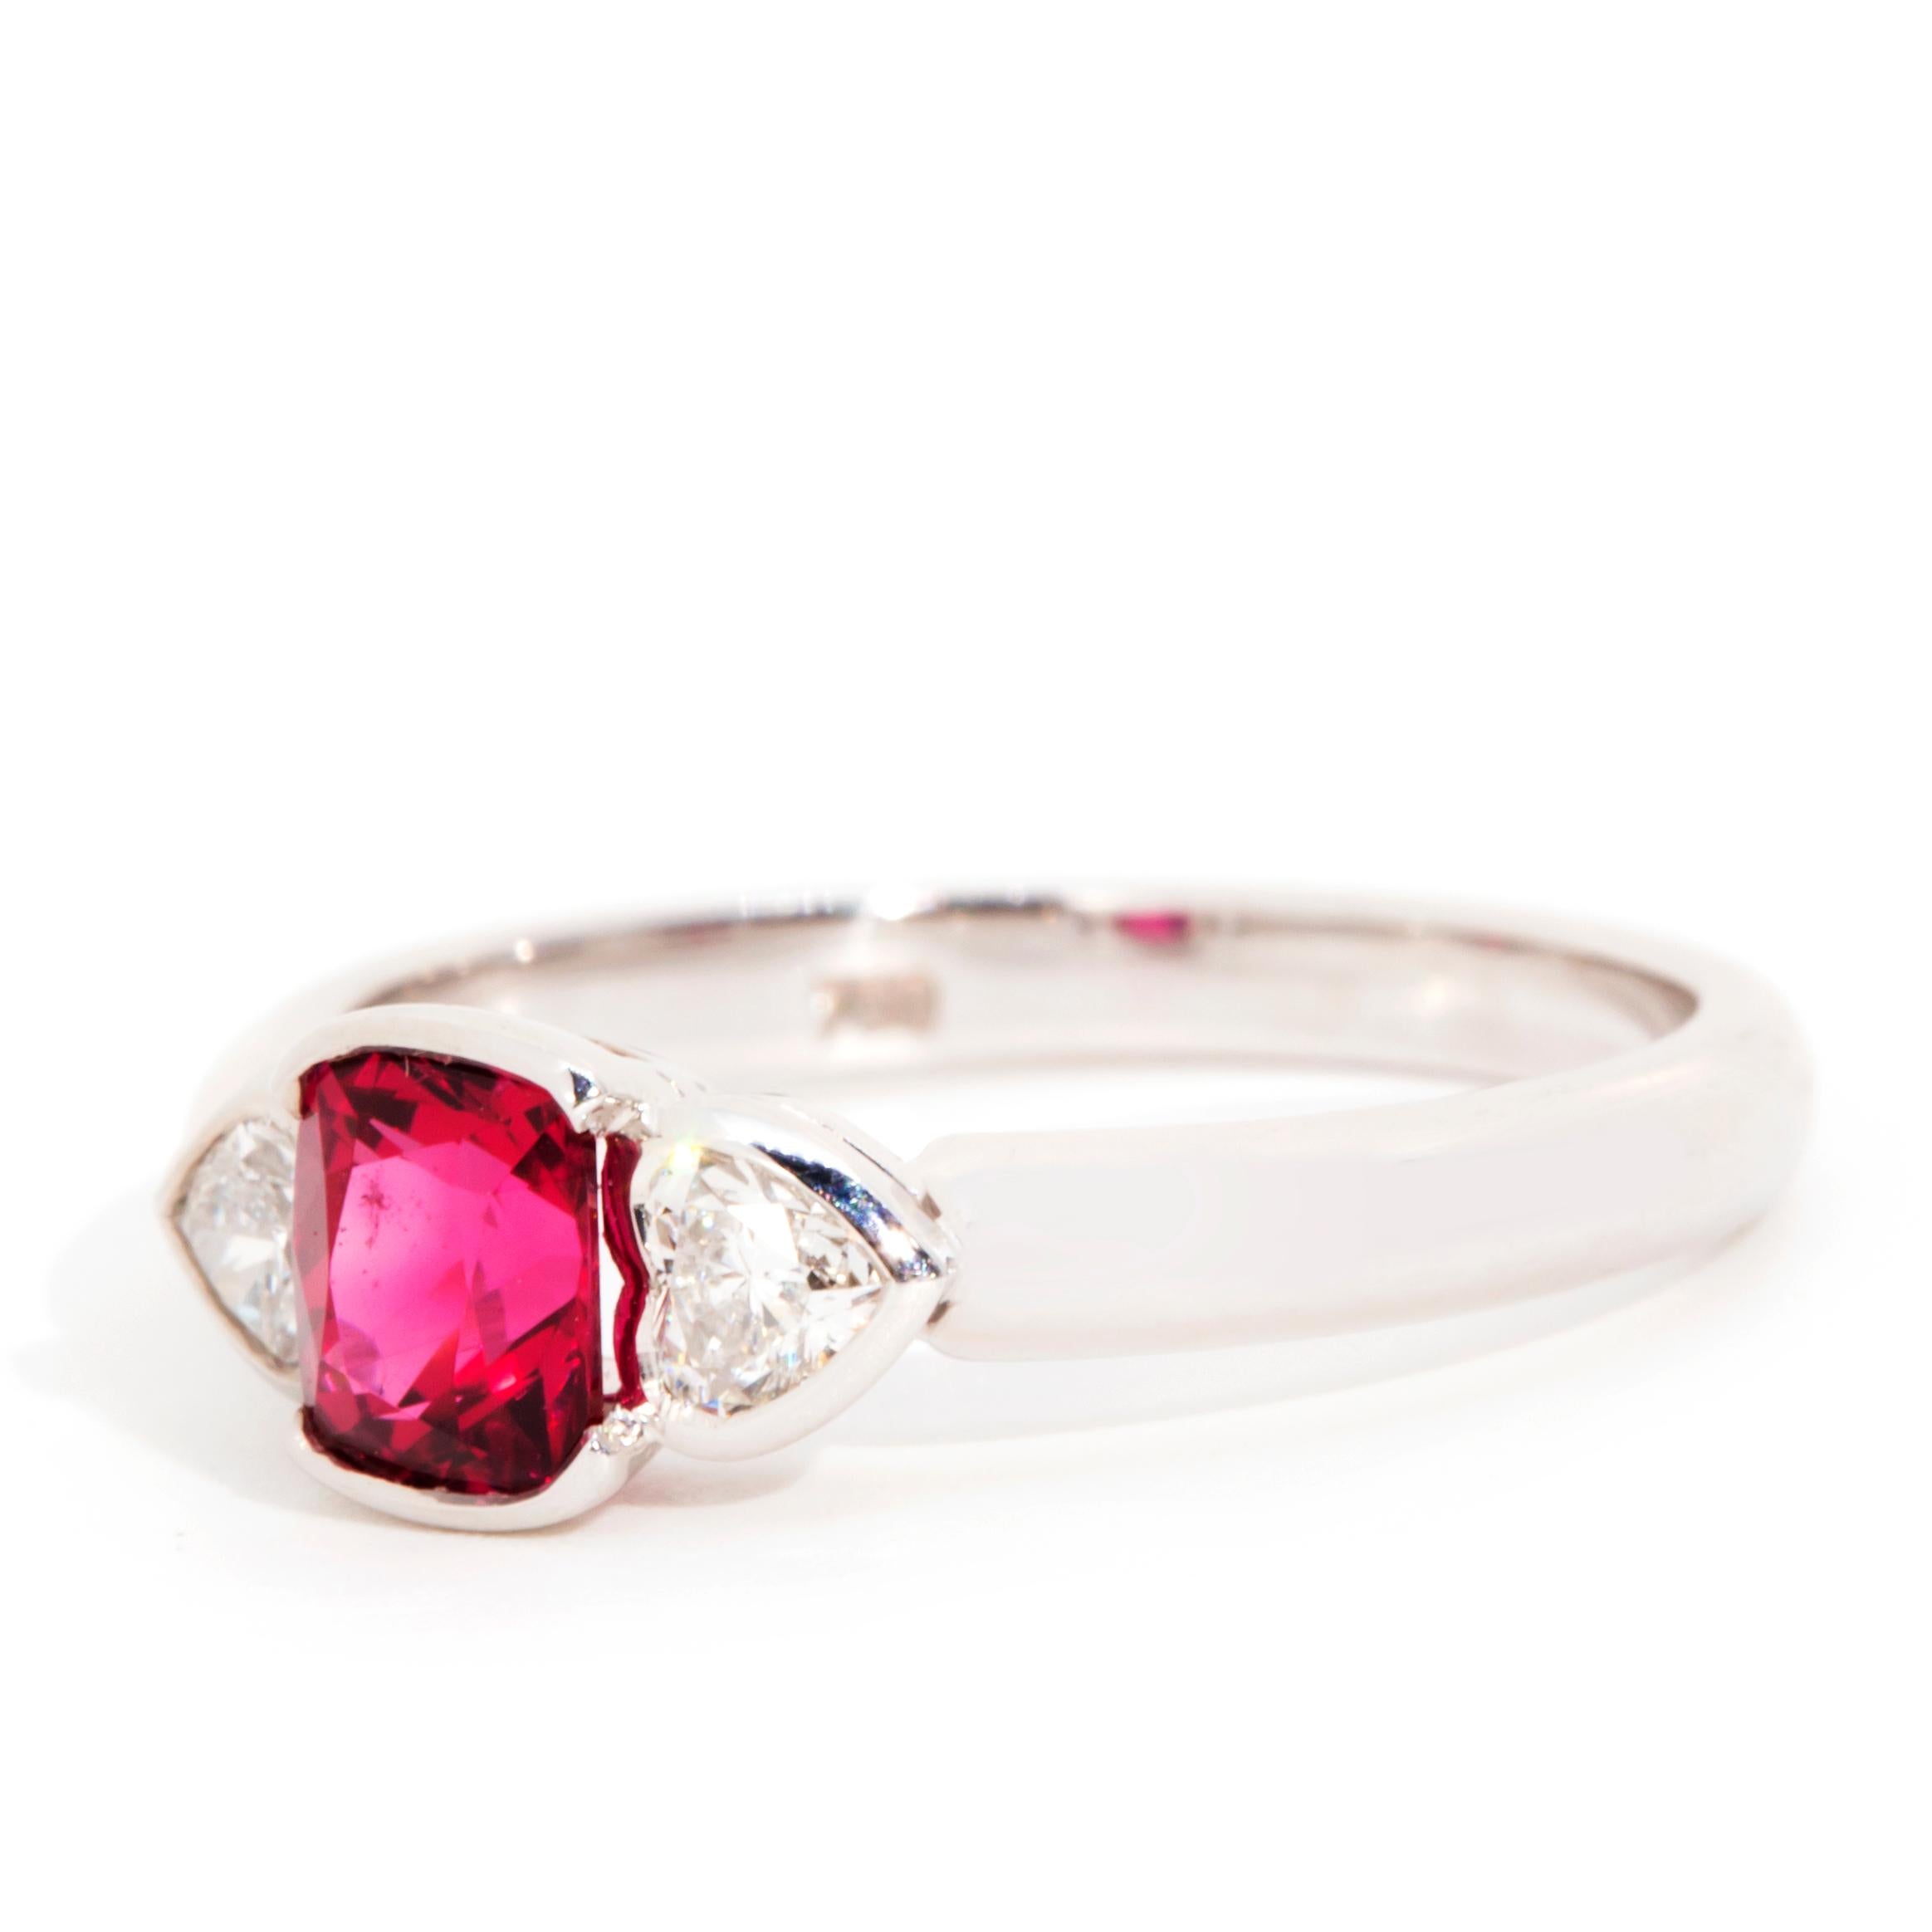 18 Carat White Gold 0.89 Carat Bright Red Spinel and Diamond Vintage Hearts Ring In Good Condition For Sale In Hamilton, AU